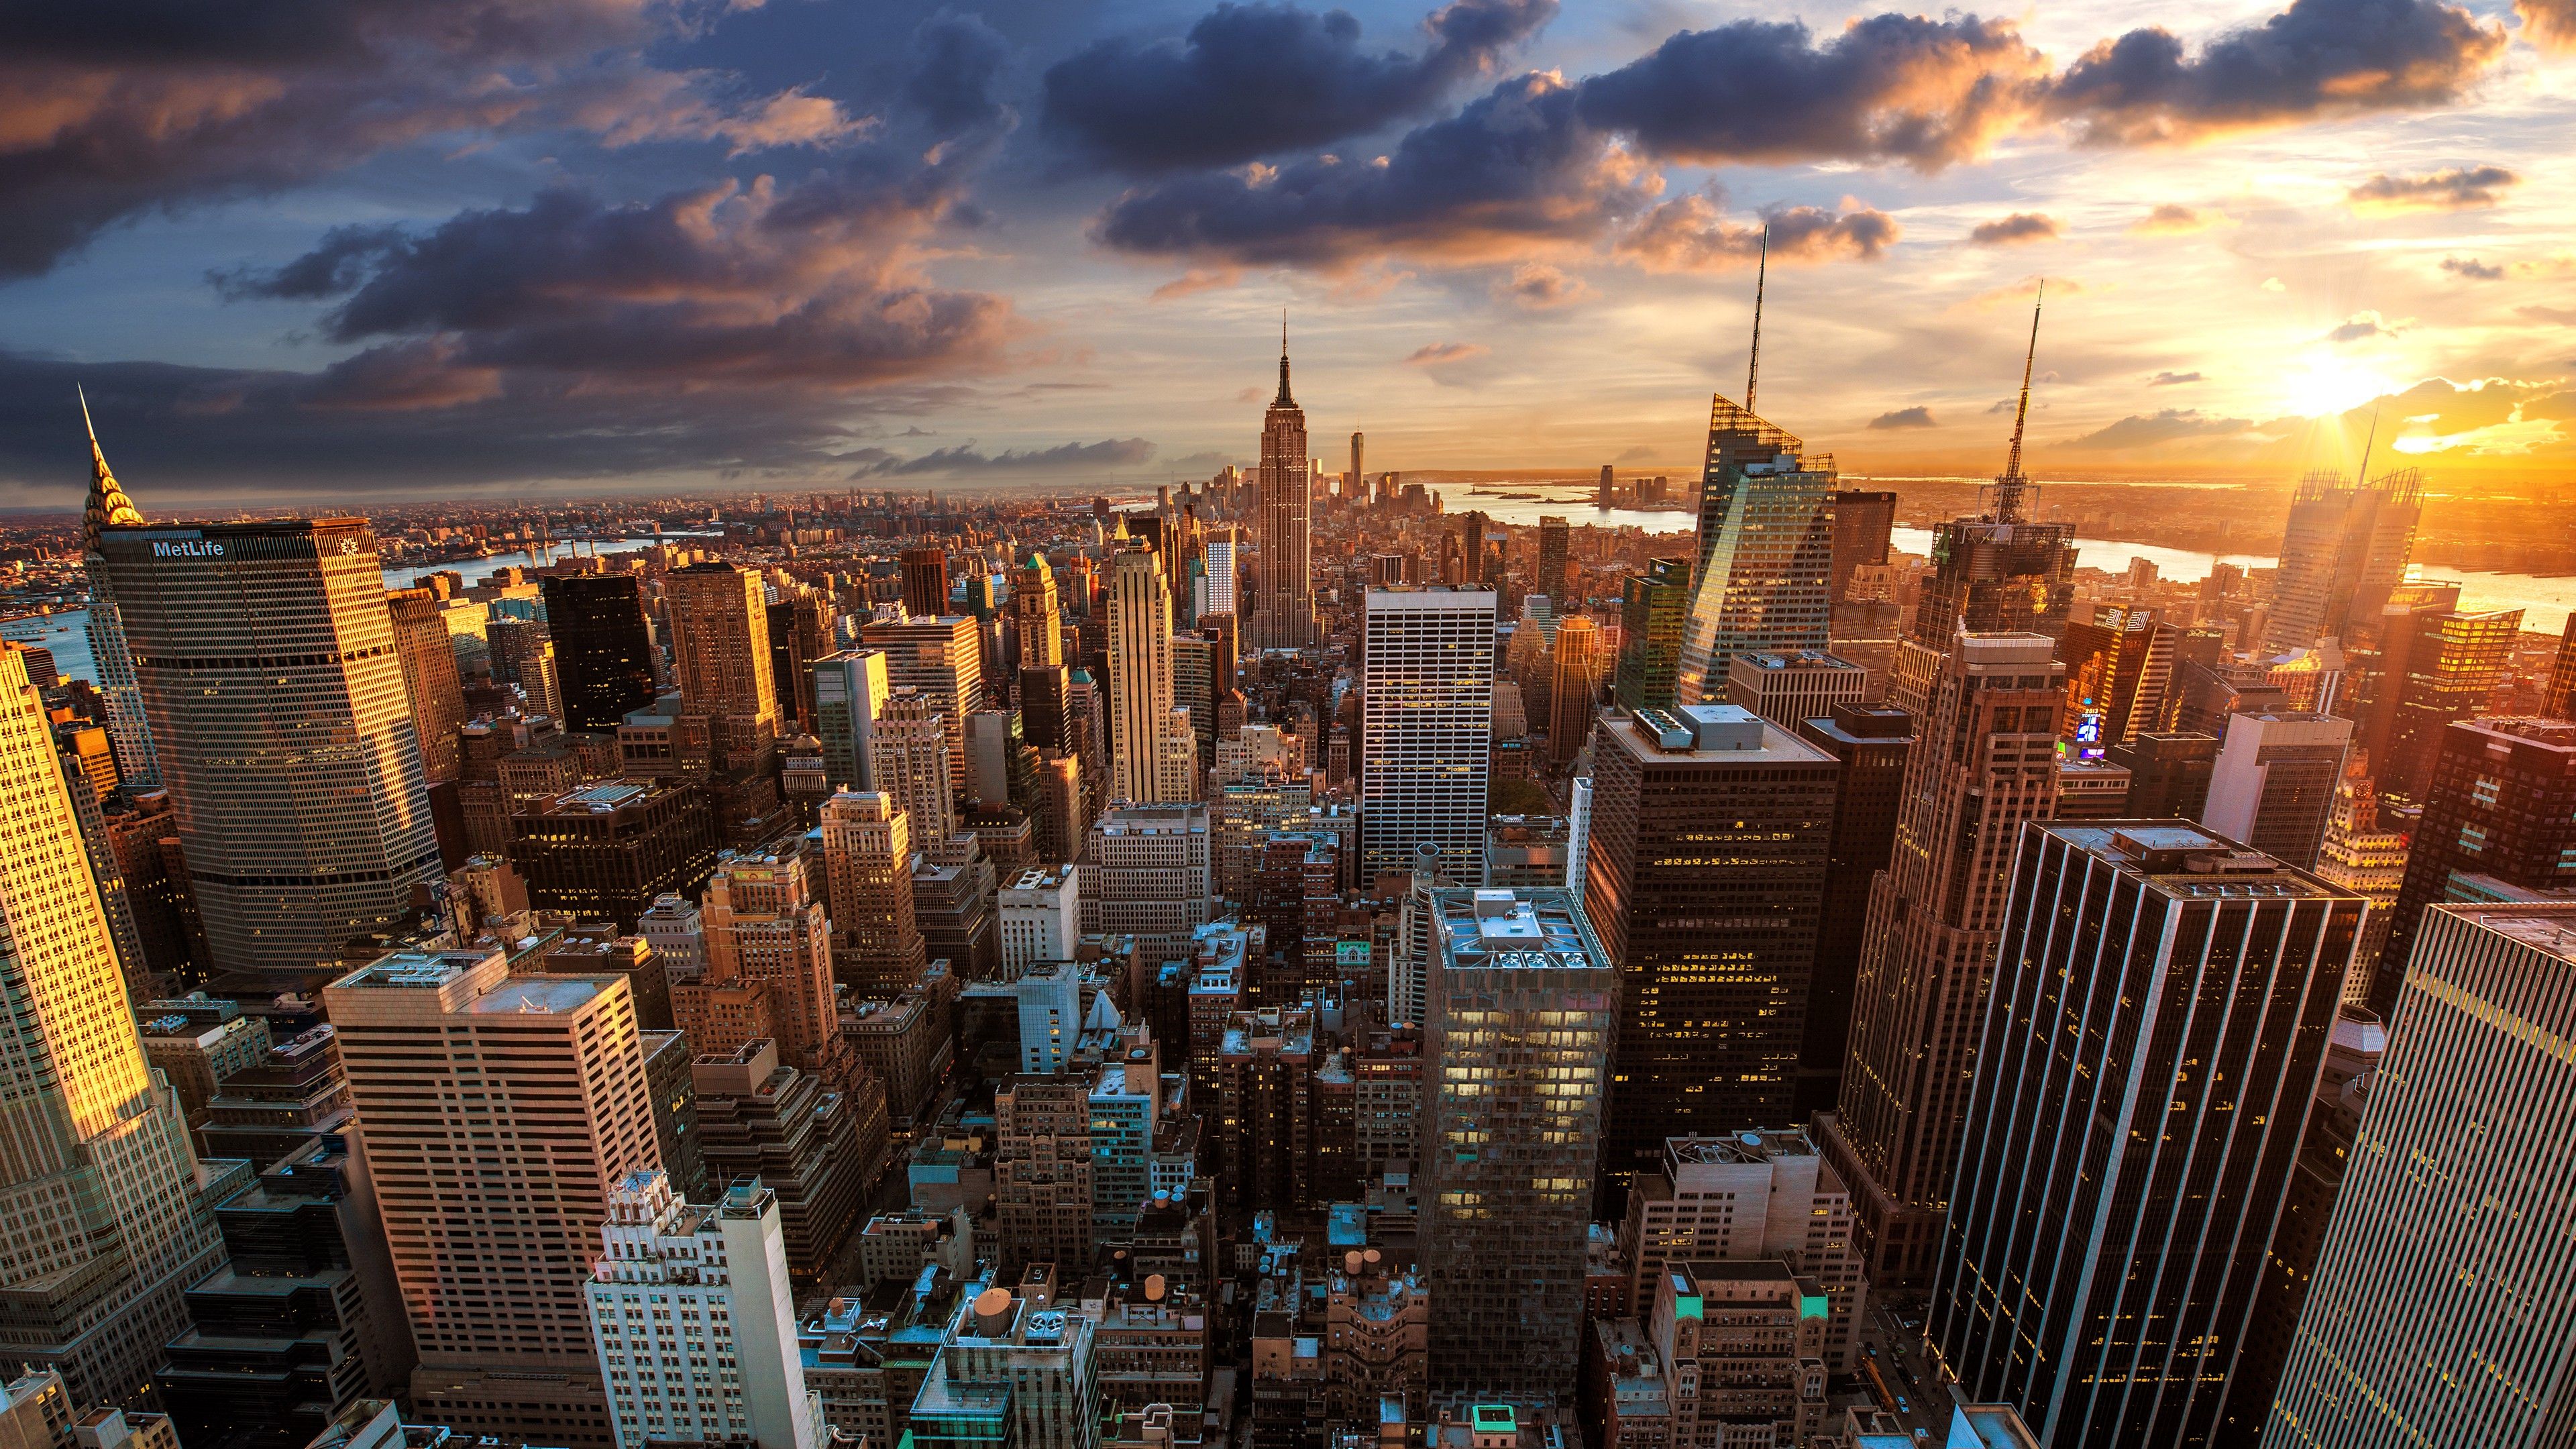 Maximize: Cityscapes New York City Skyscrapers Usa Cities Wallpaper